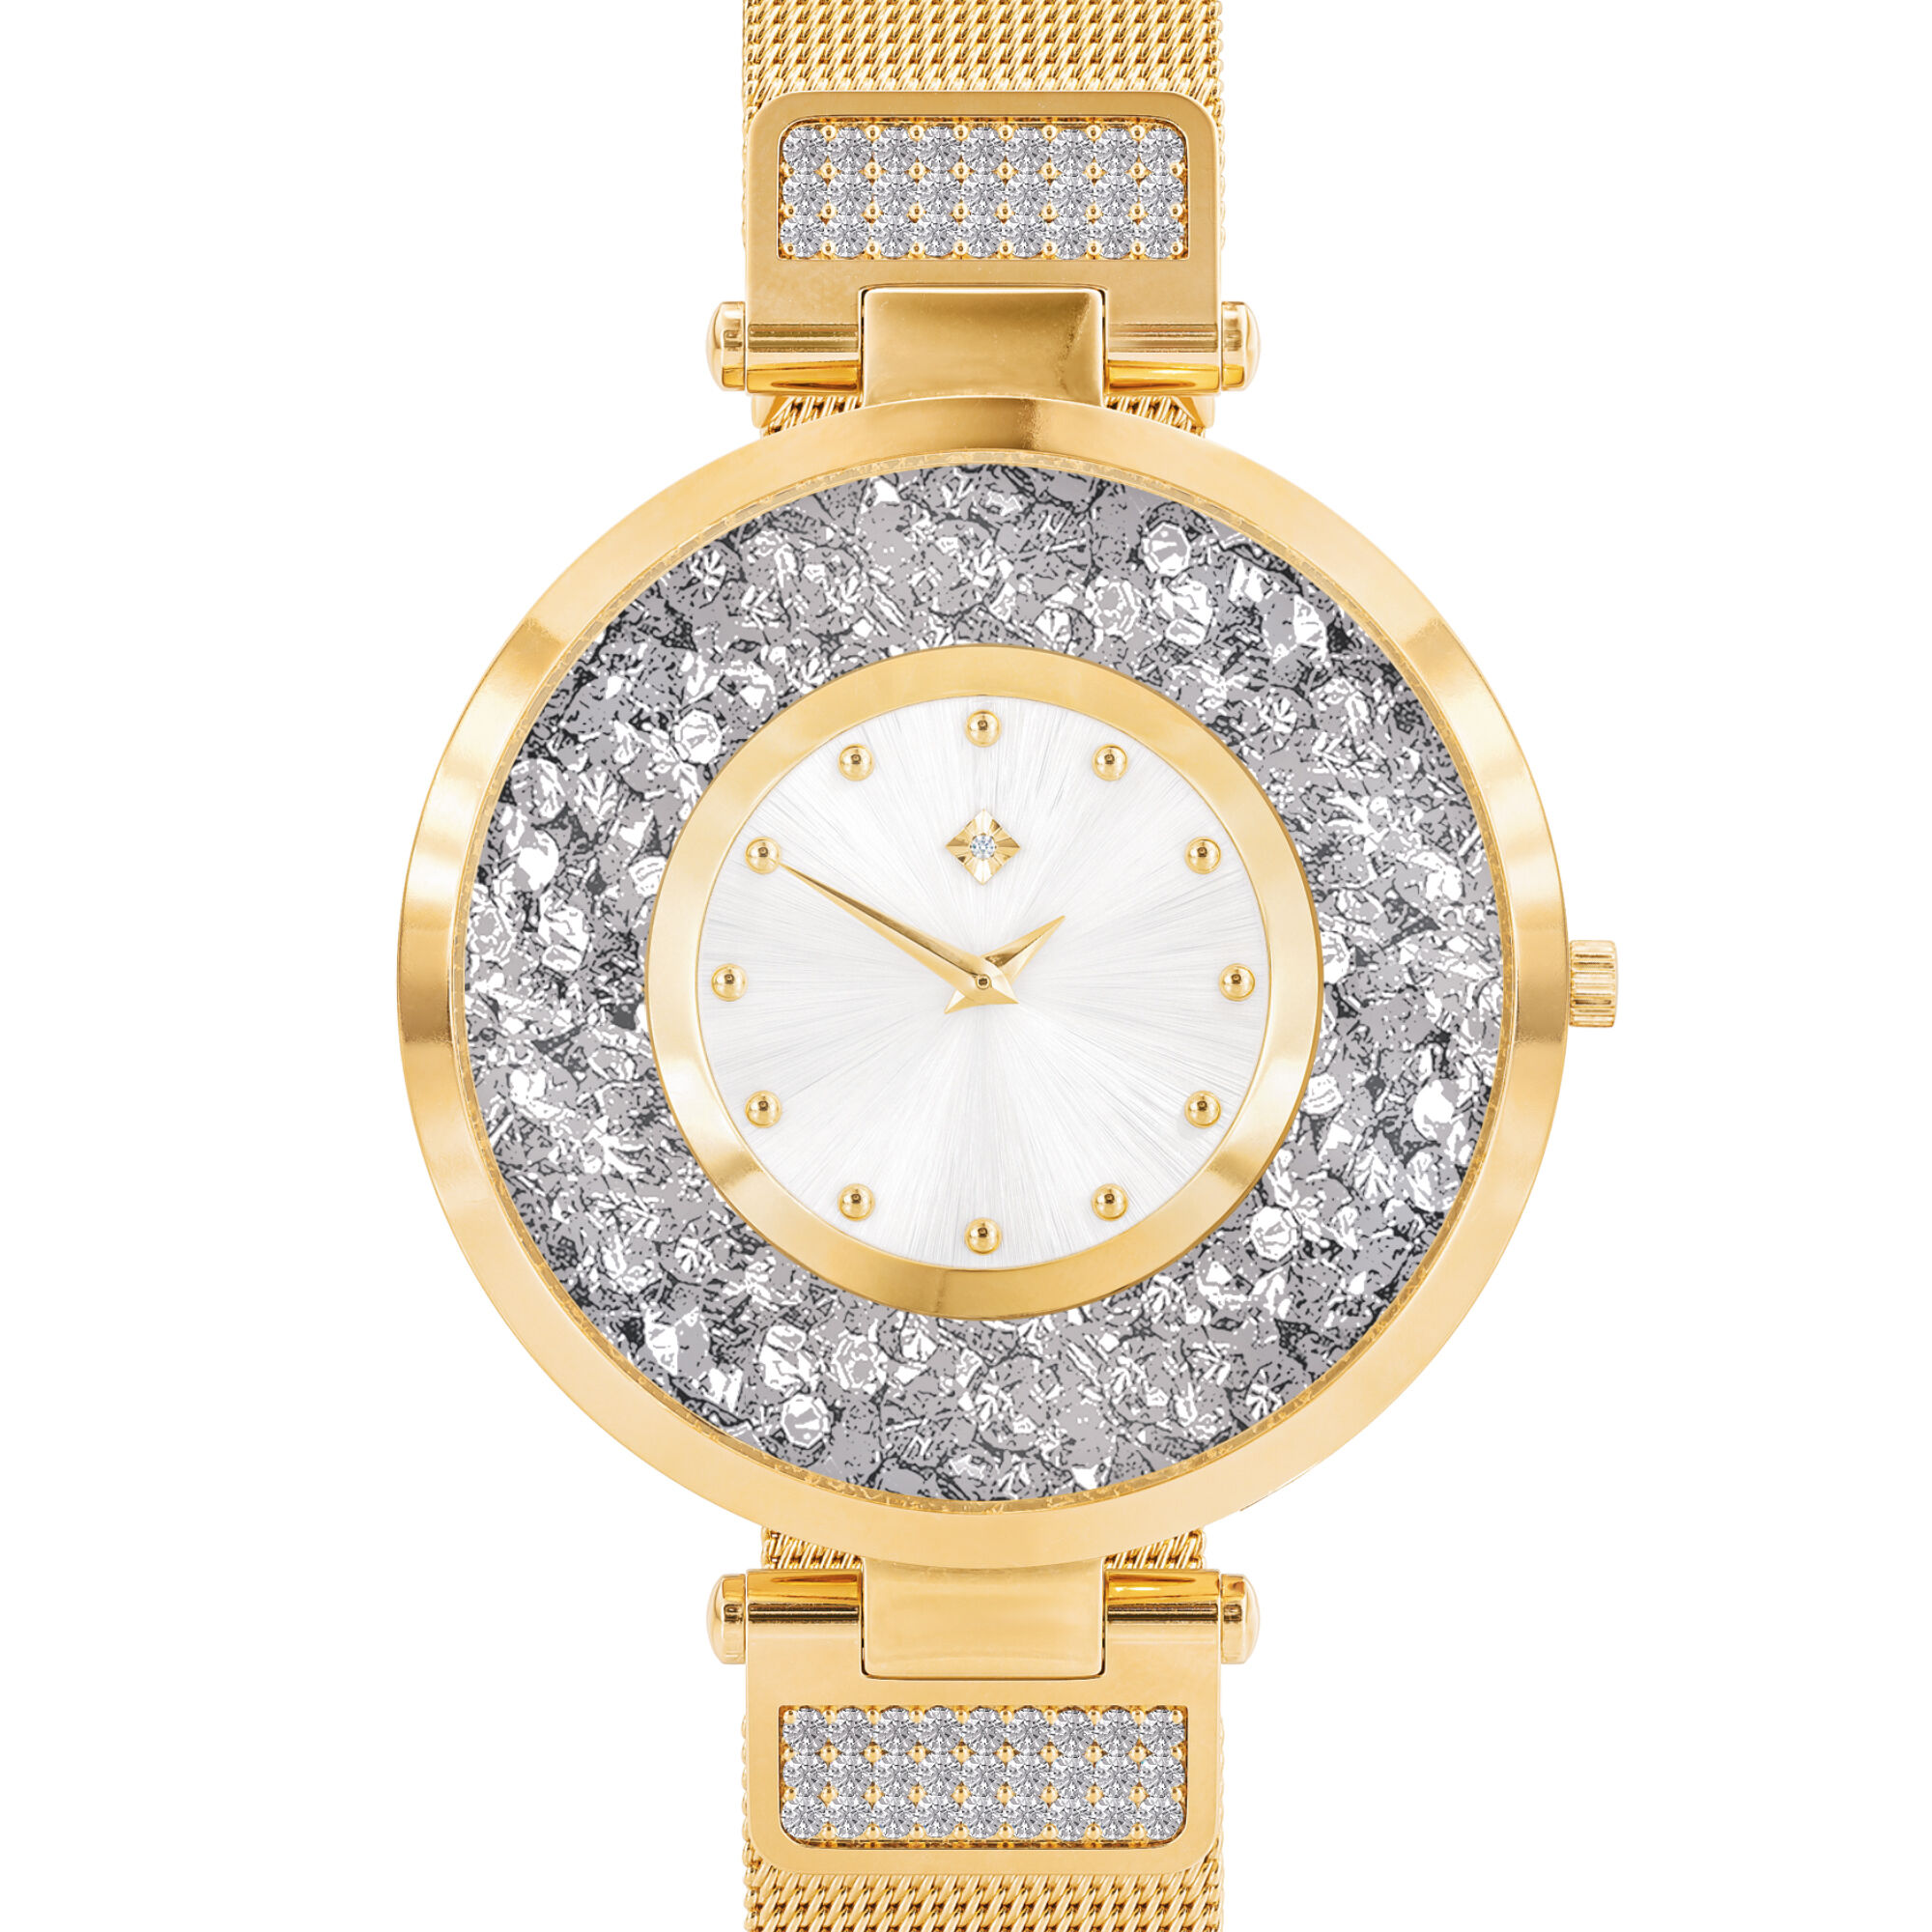 Womens Floating Birthstone Watch 10388 0019 d april